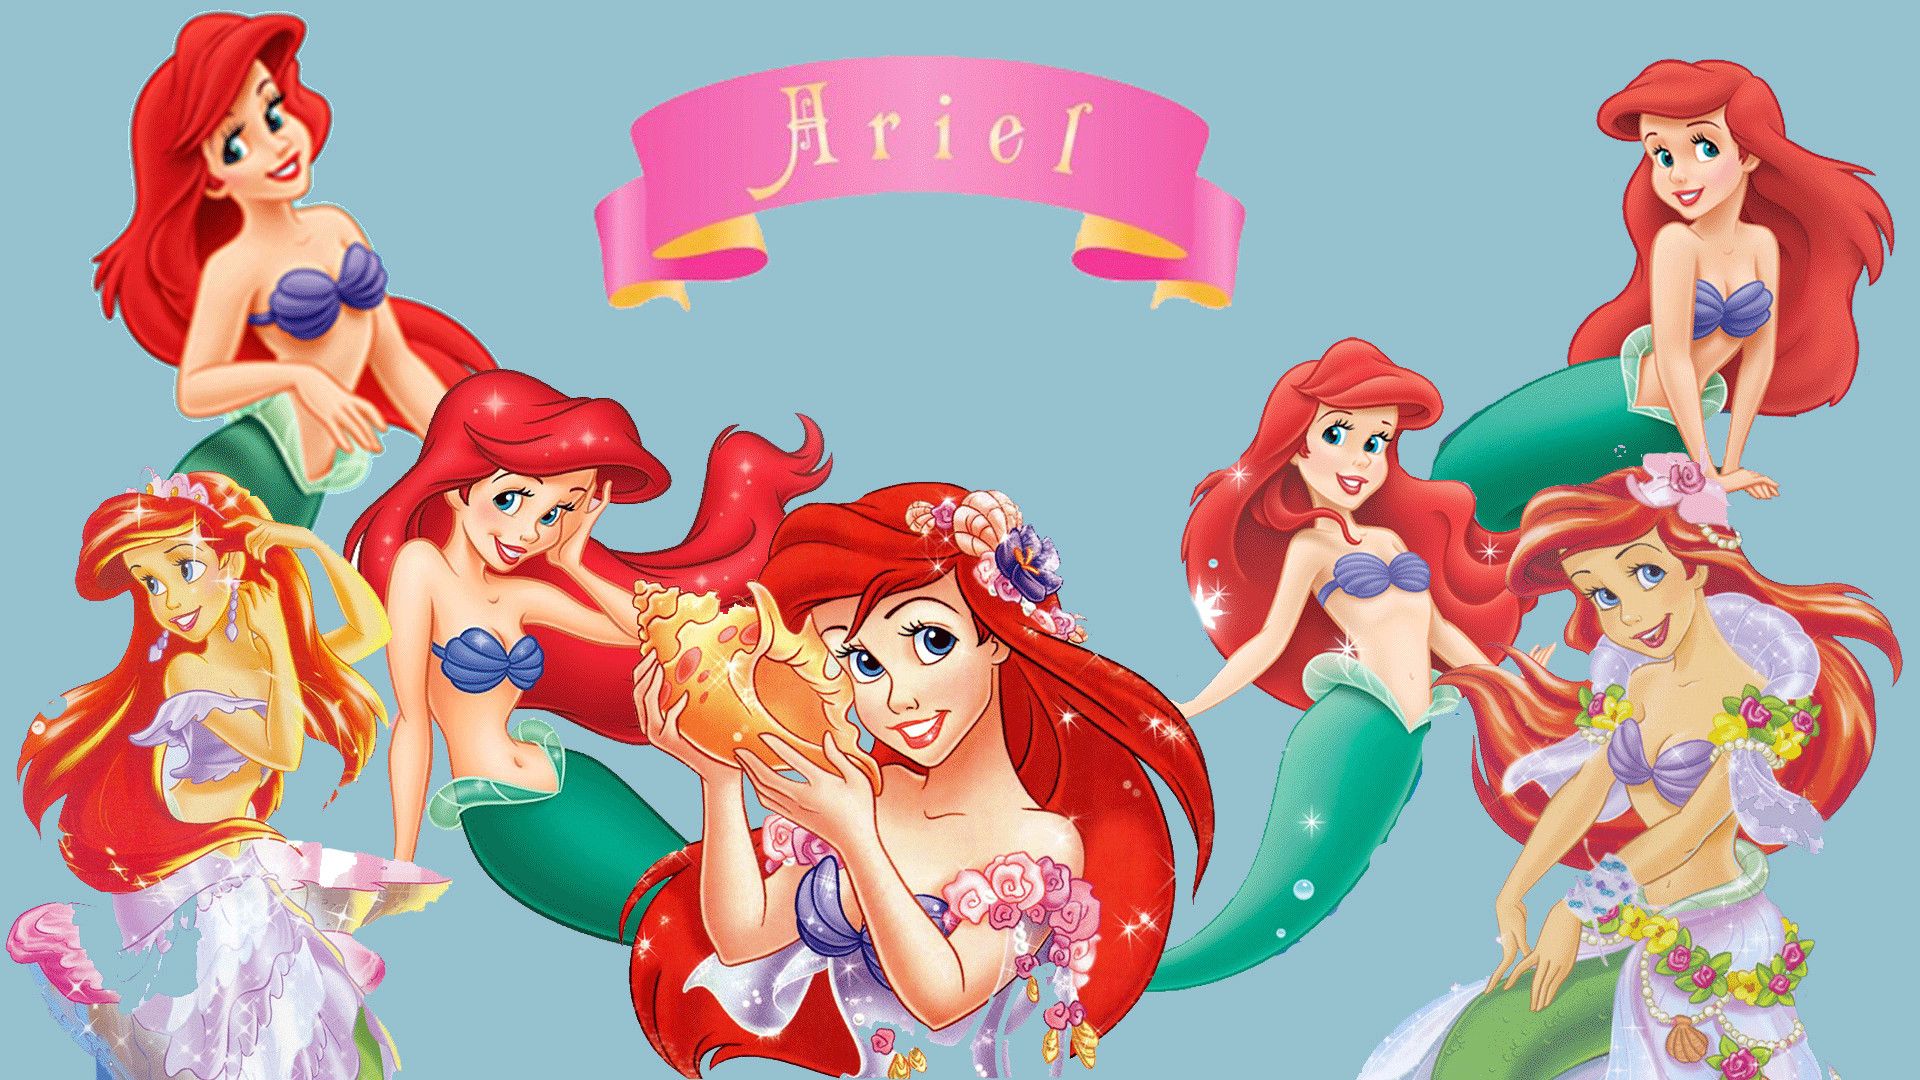 Awesome High Resolution Disney Princess Ariel Wallpaper HD picture